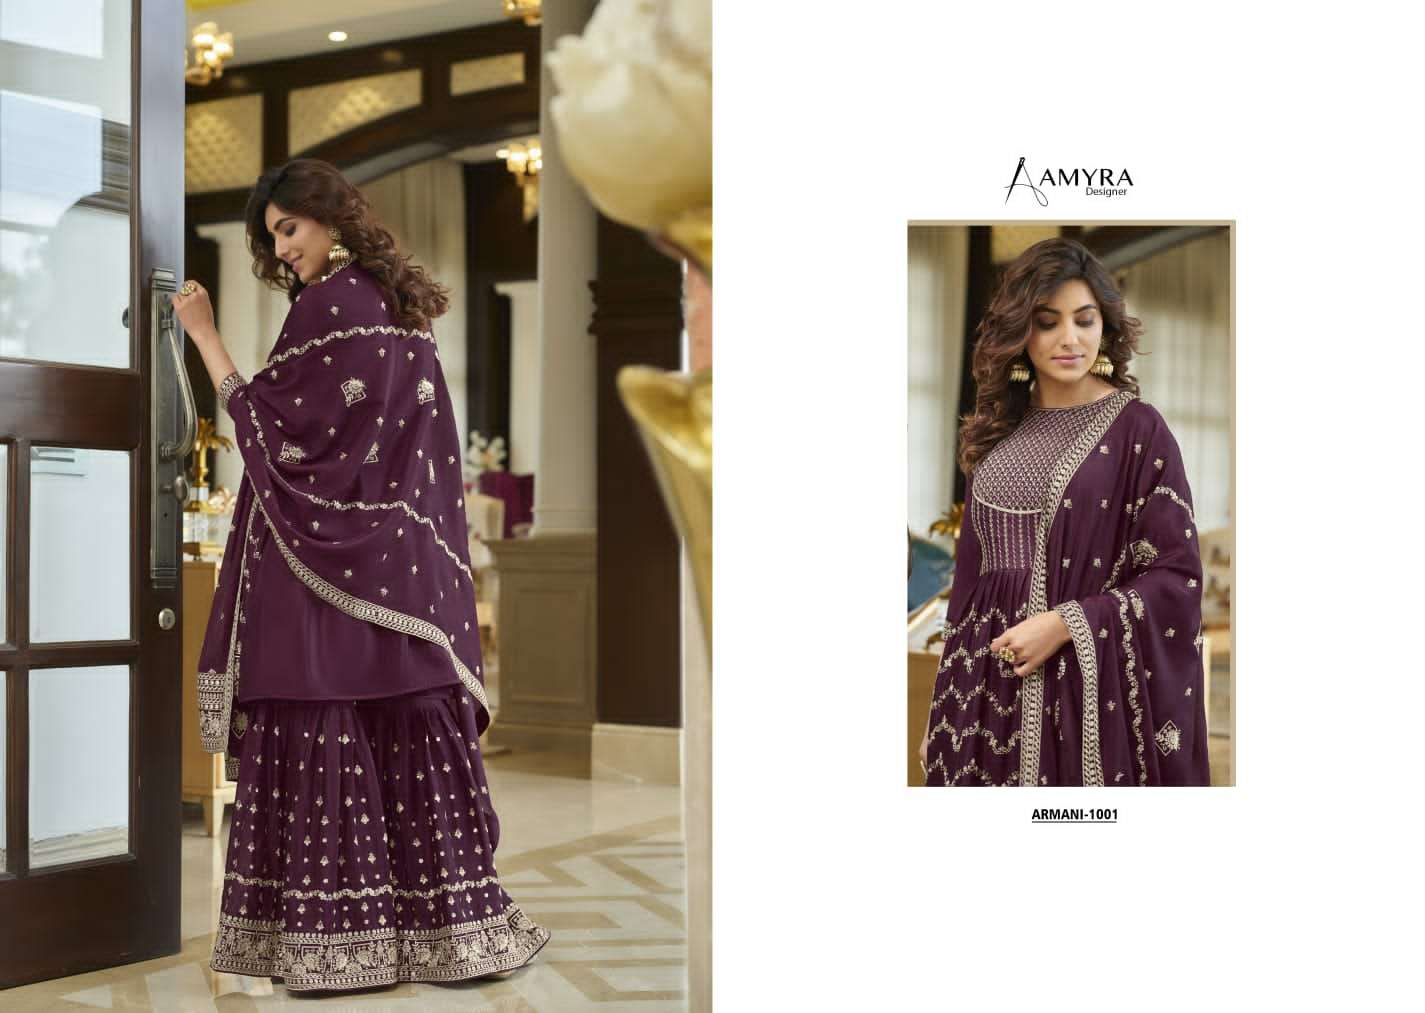 aamyra designer armani 1001-1003 series chinon with fancy work salwar suits collection surat